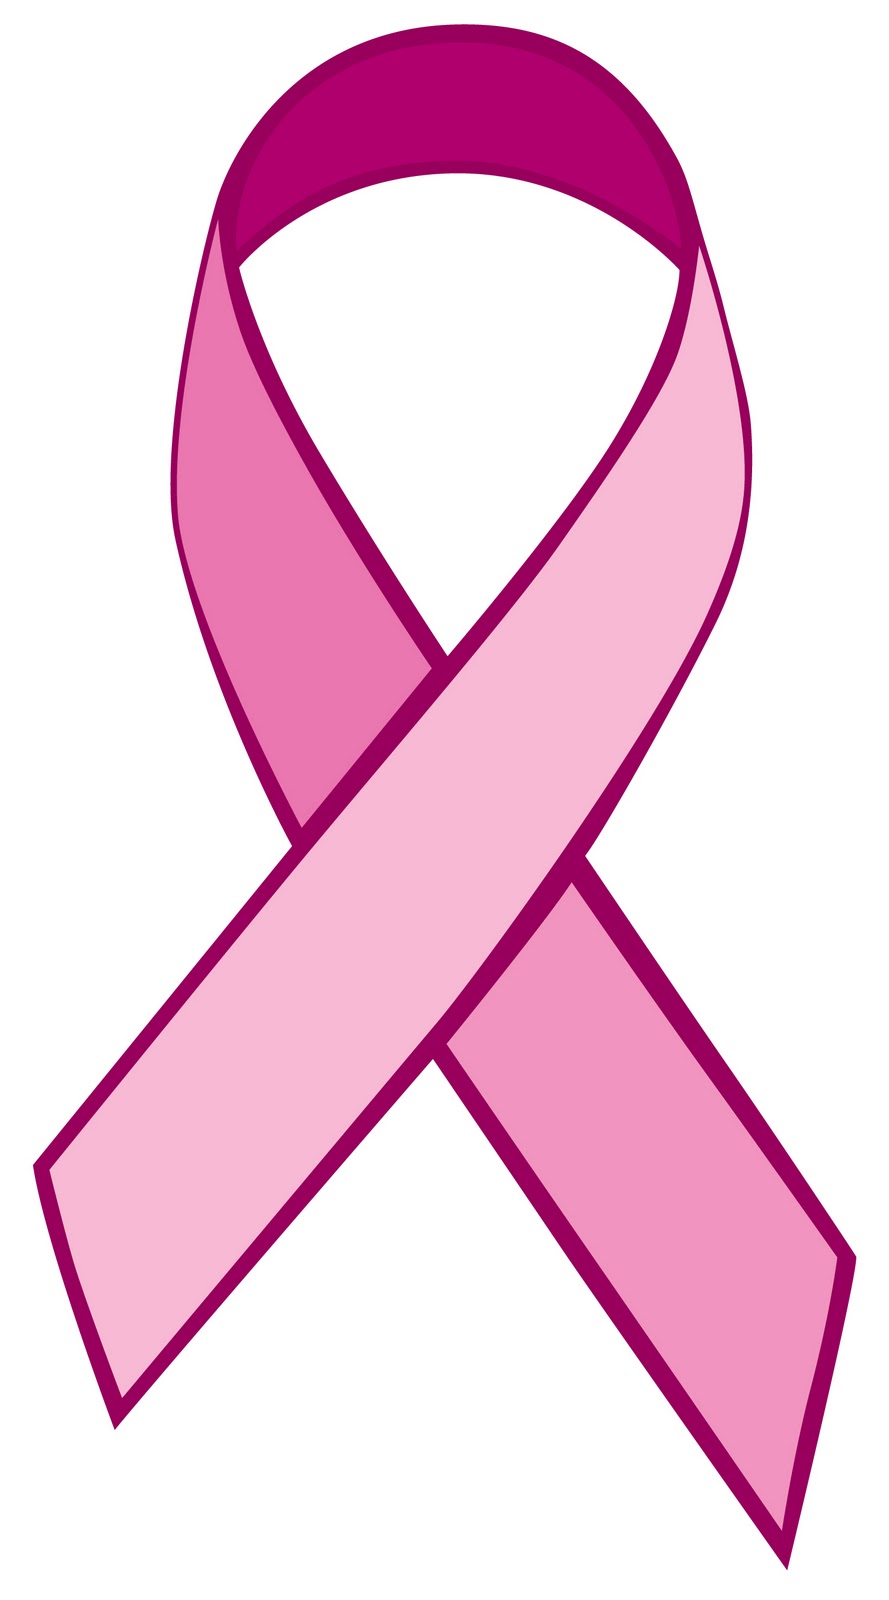 Breast Cancer Ribbon Clipart - ClipArt Best